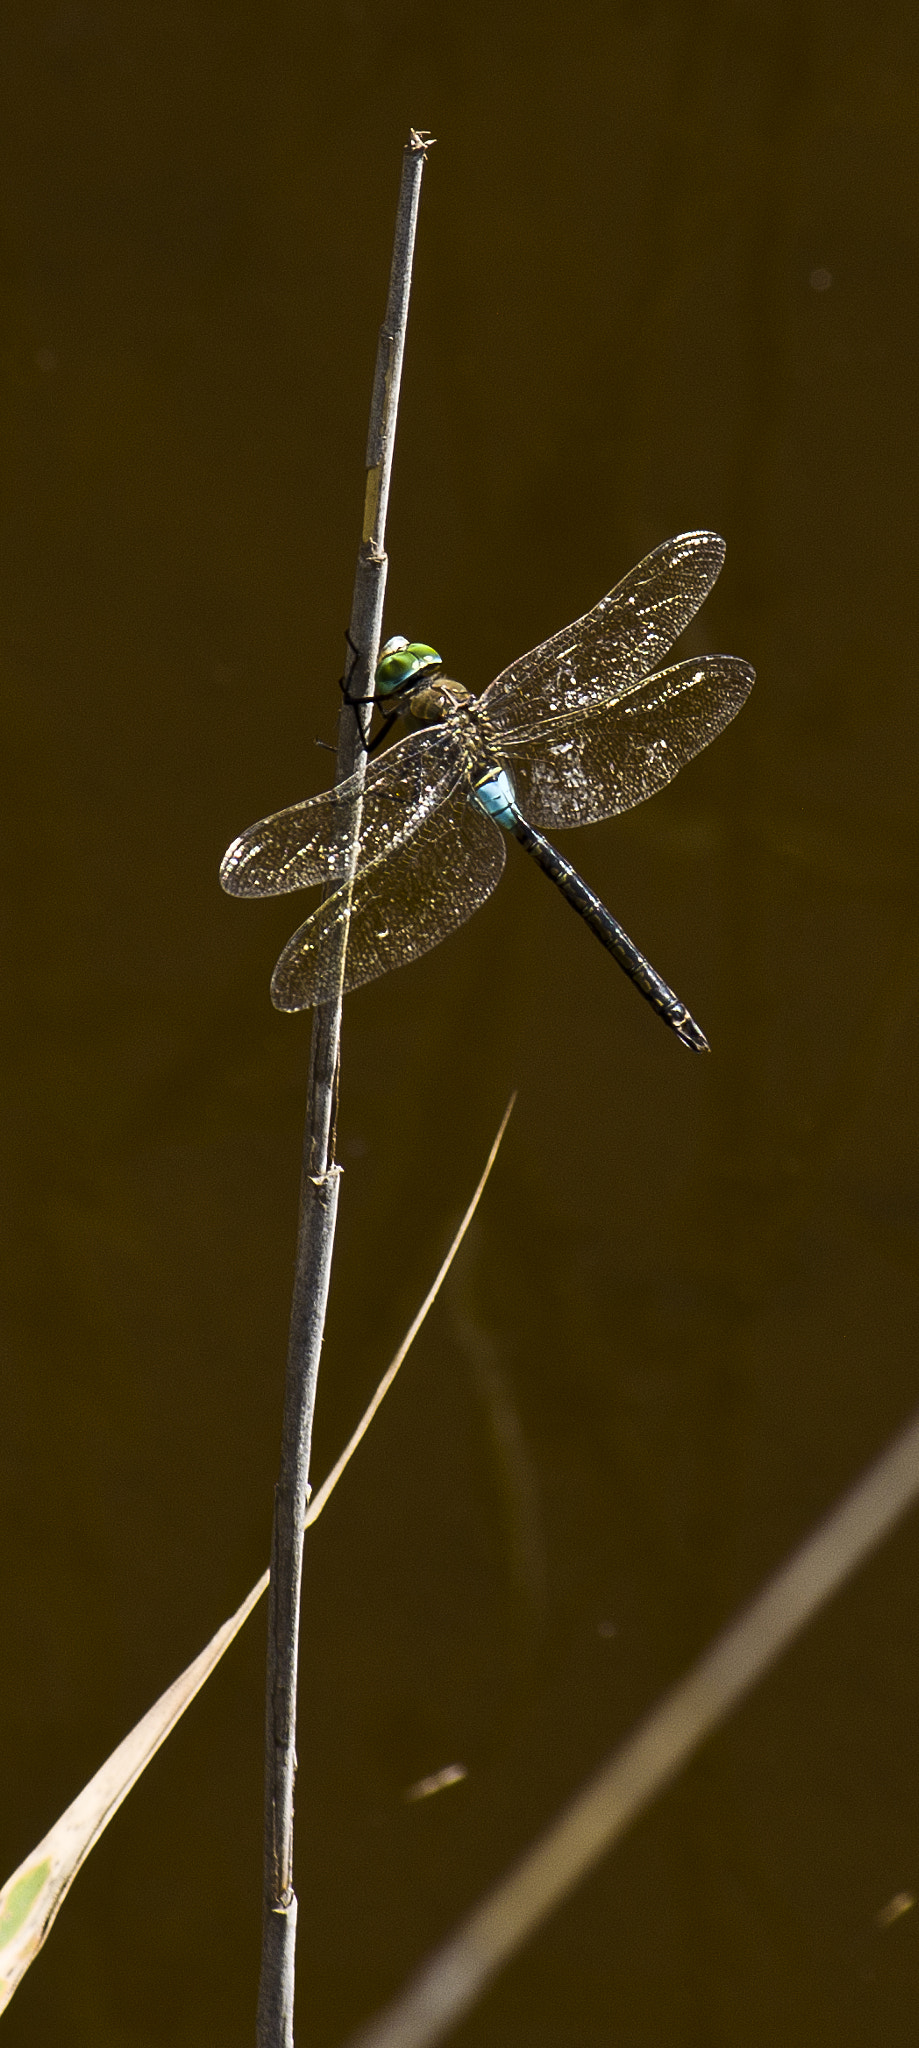 Pentax K-r sample photo. Dragonfly photography